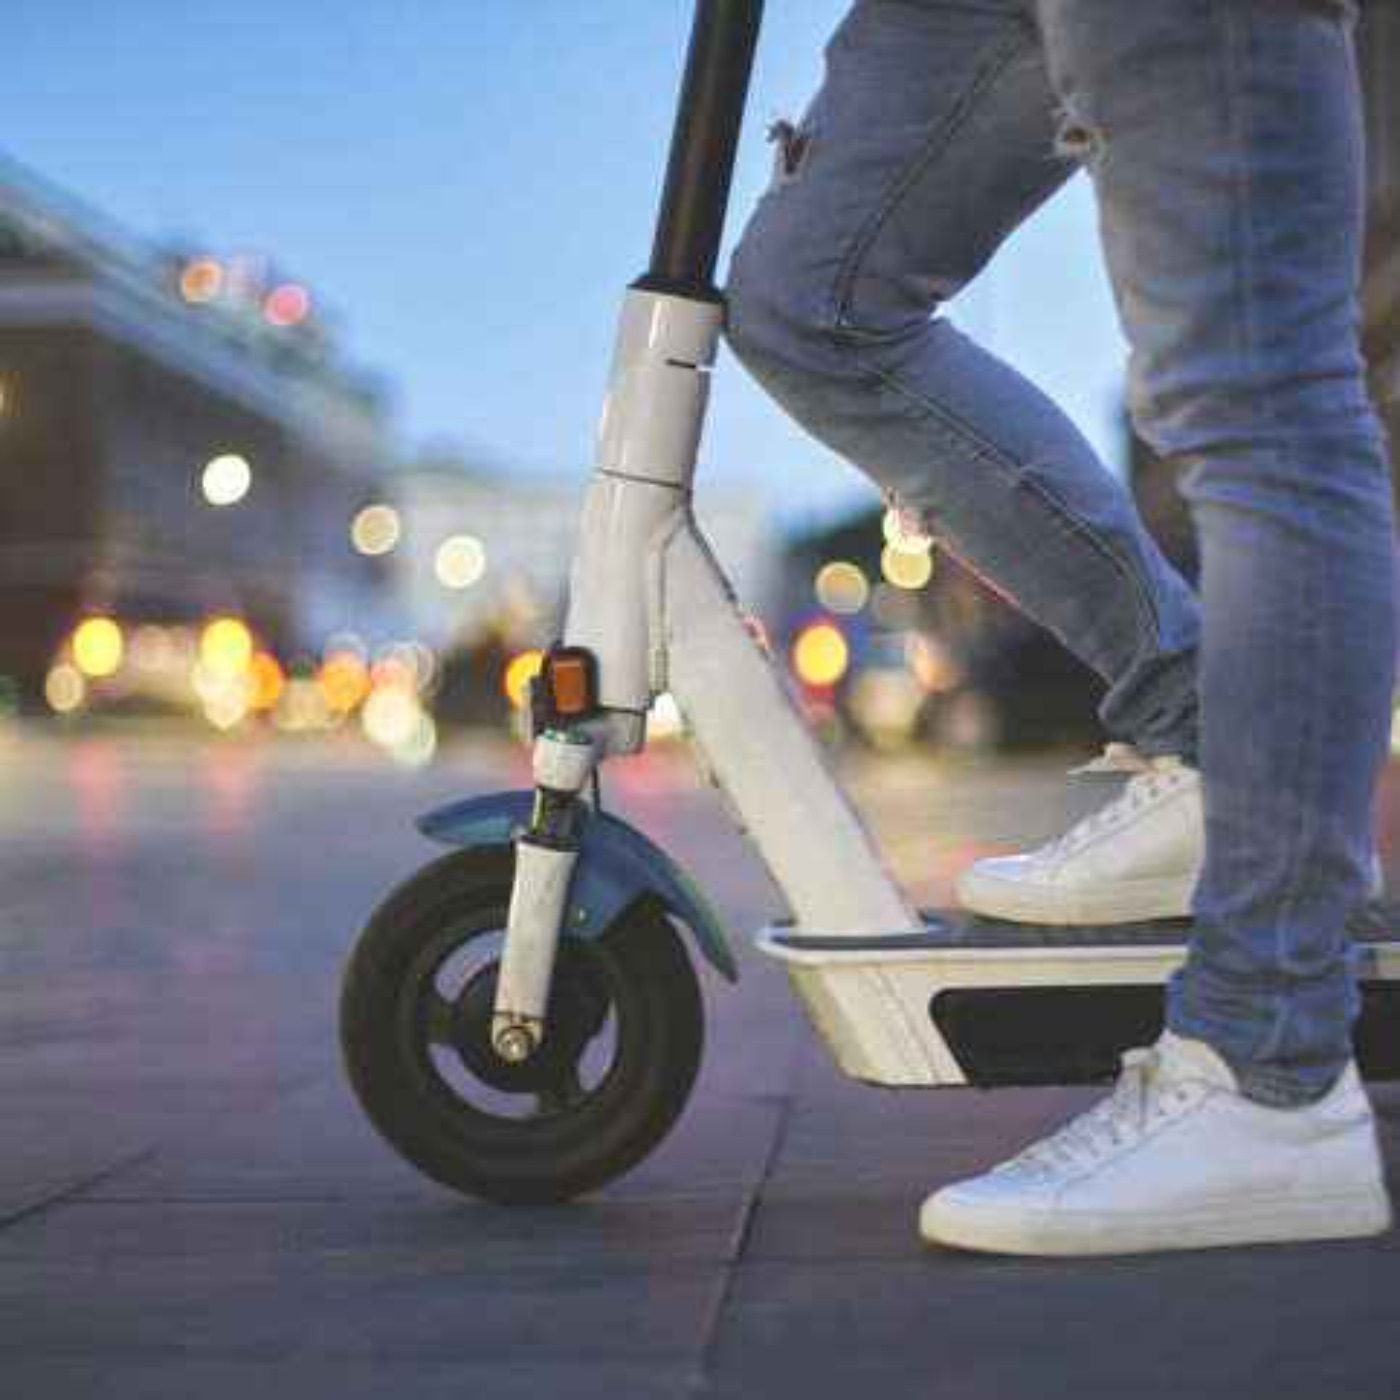 New e-scooter regulations to be put in place